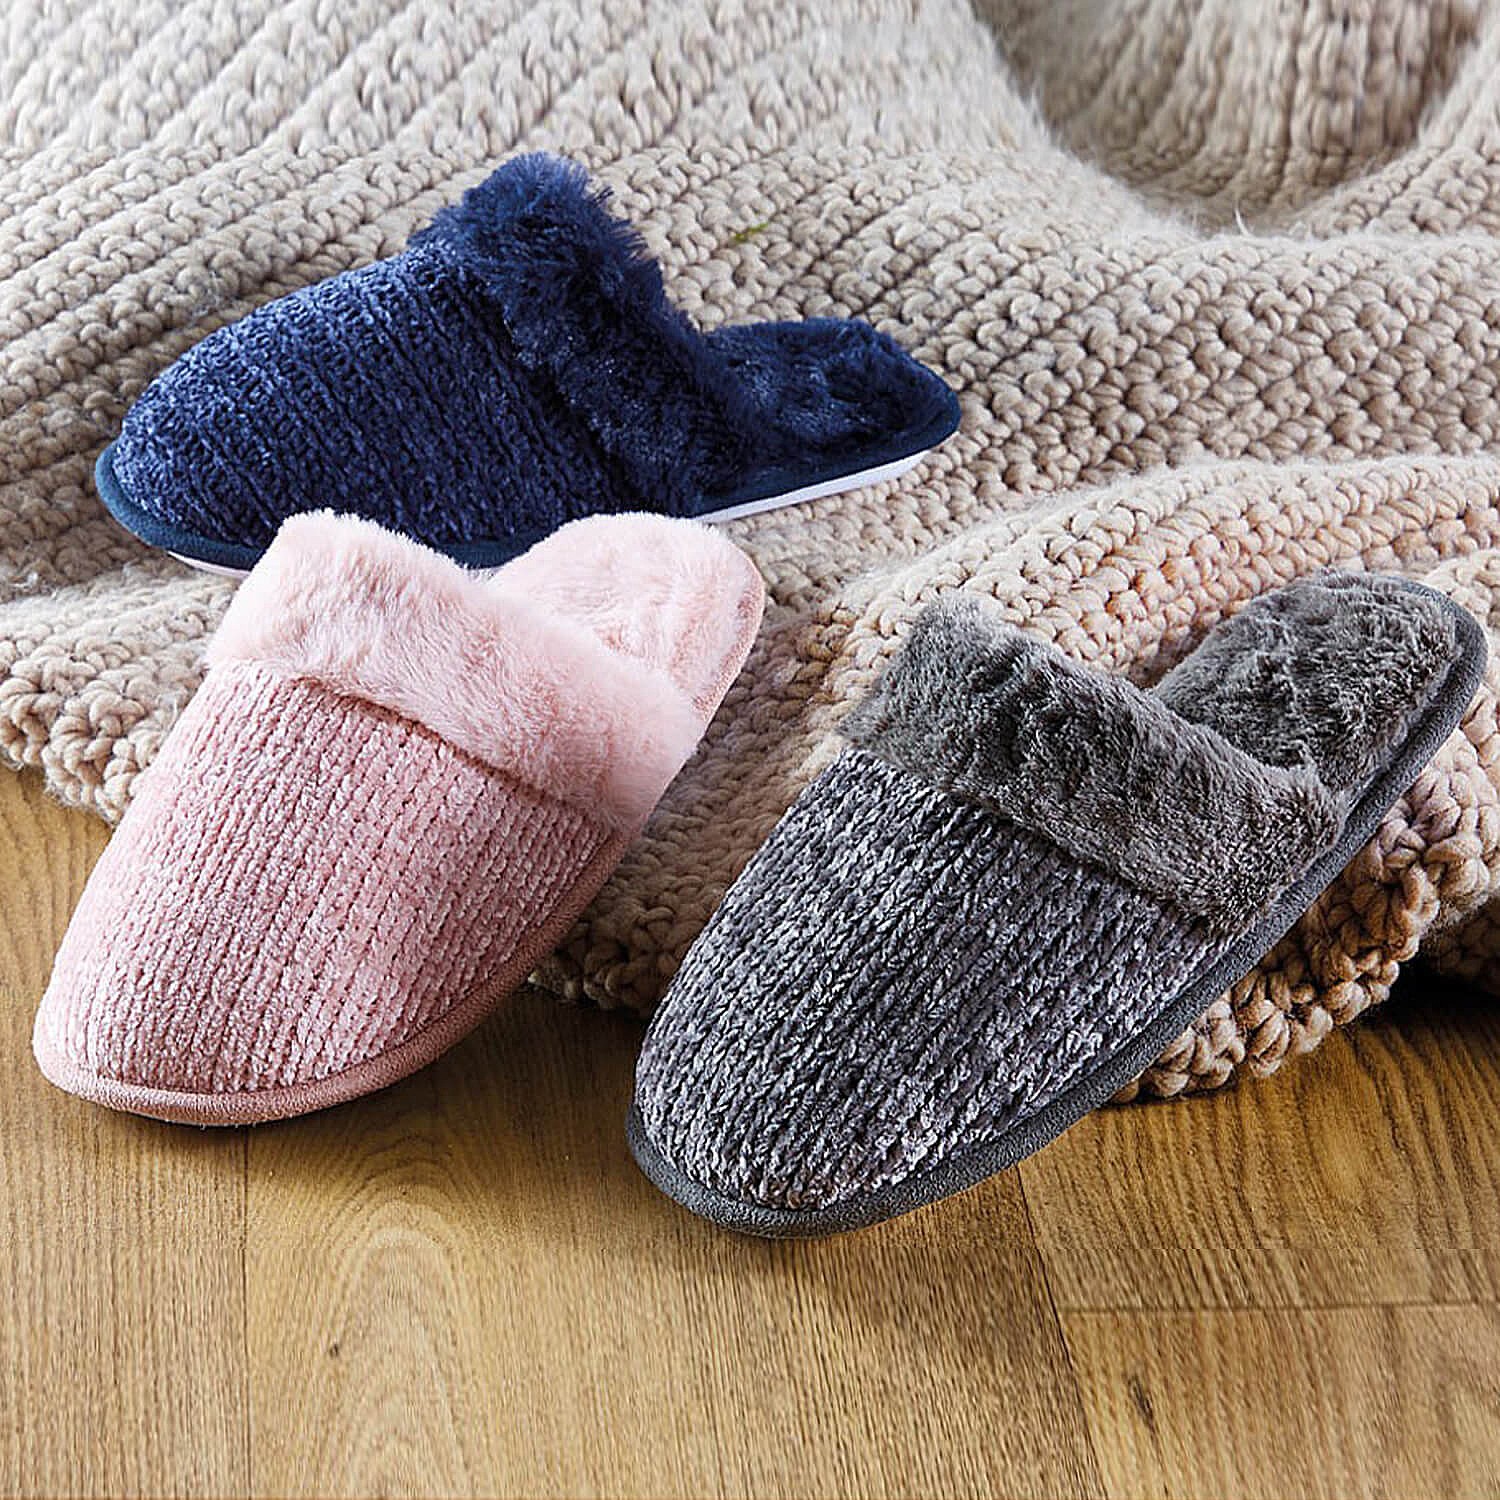 Chenille Mule Slippers - Buy 2 Pairs & Get 1 Free | Coopers of Stortford